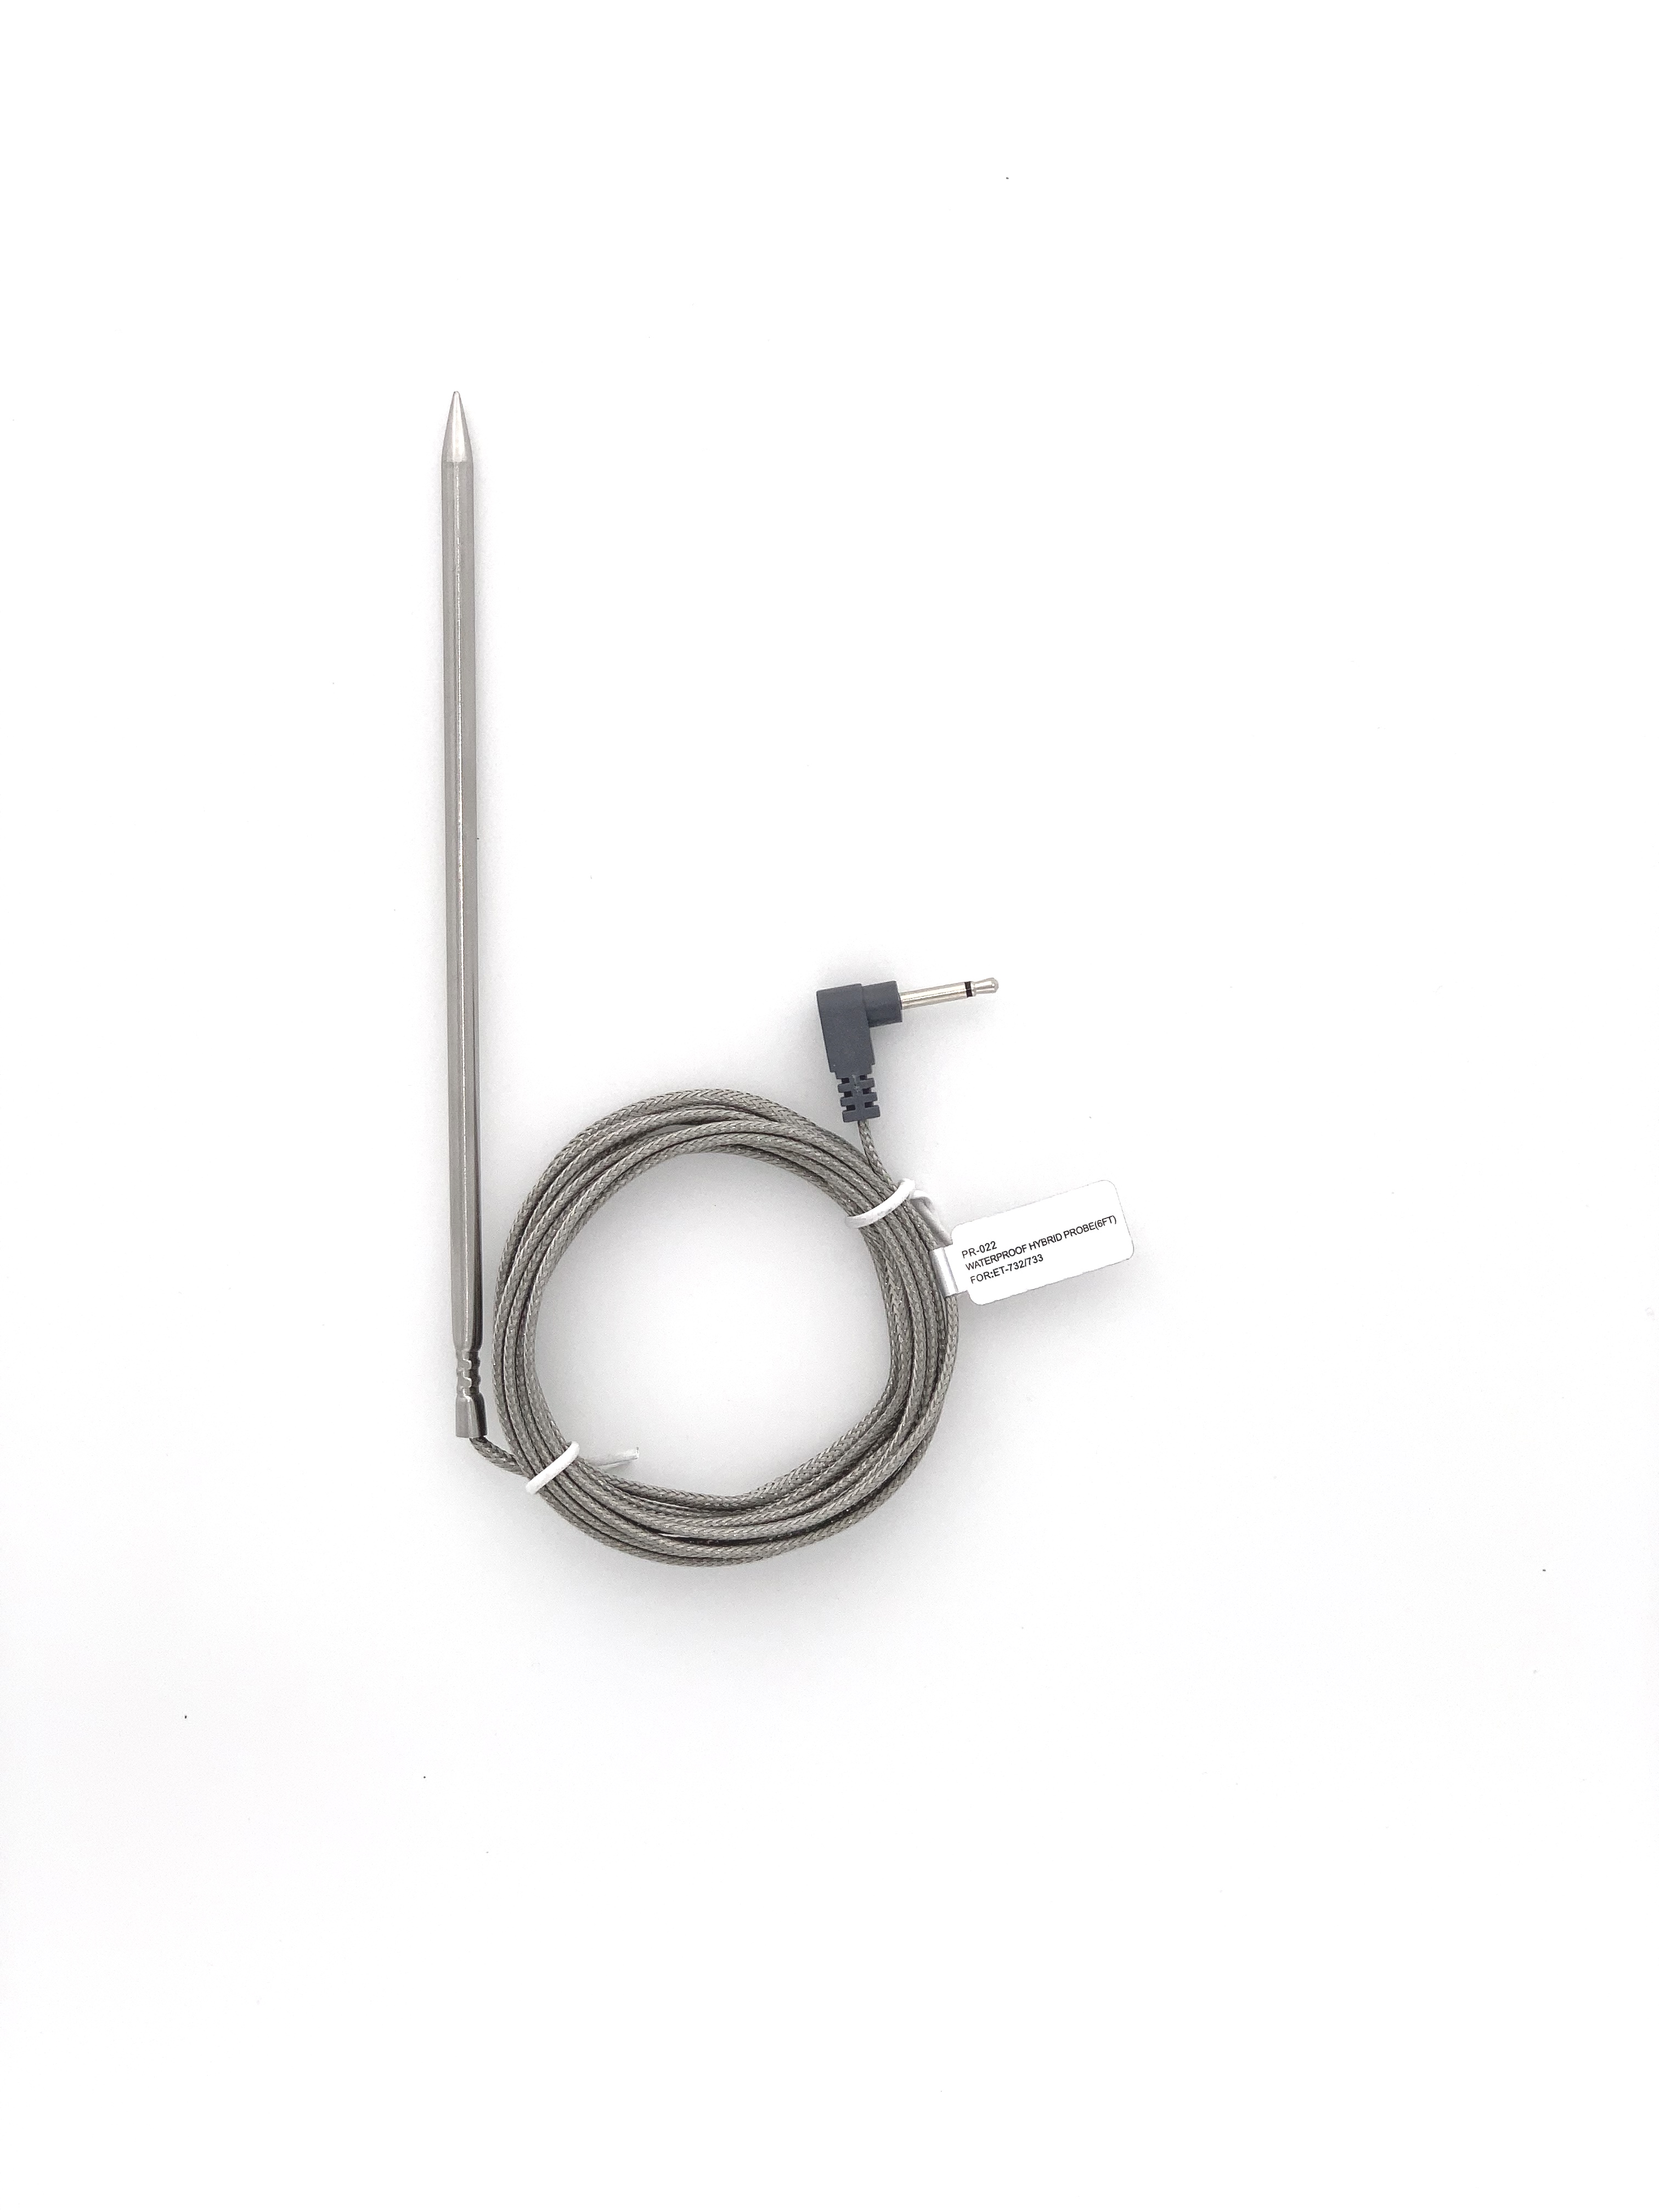 PR-006: 3-Foot Food Probe  Maverick Thermometers Replacement Parts